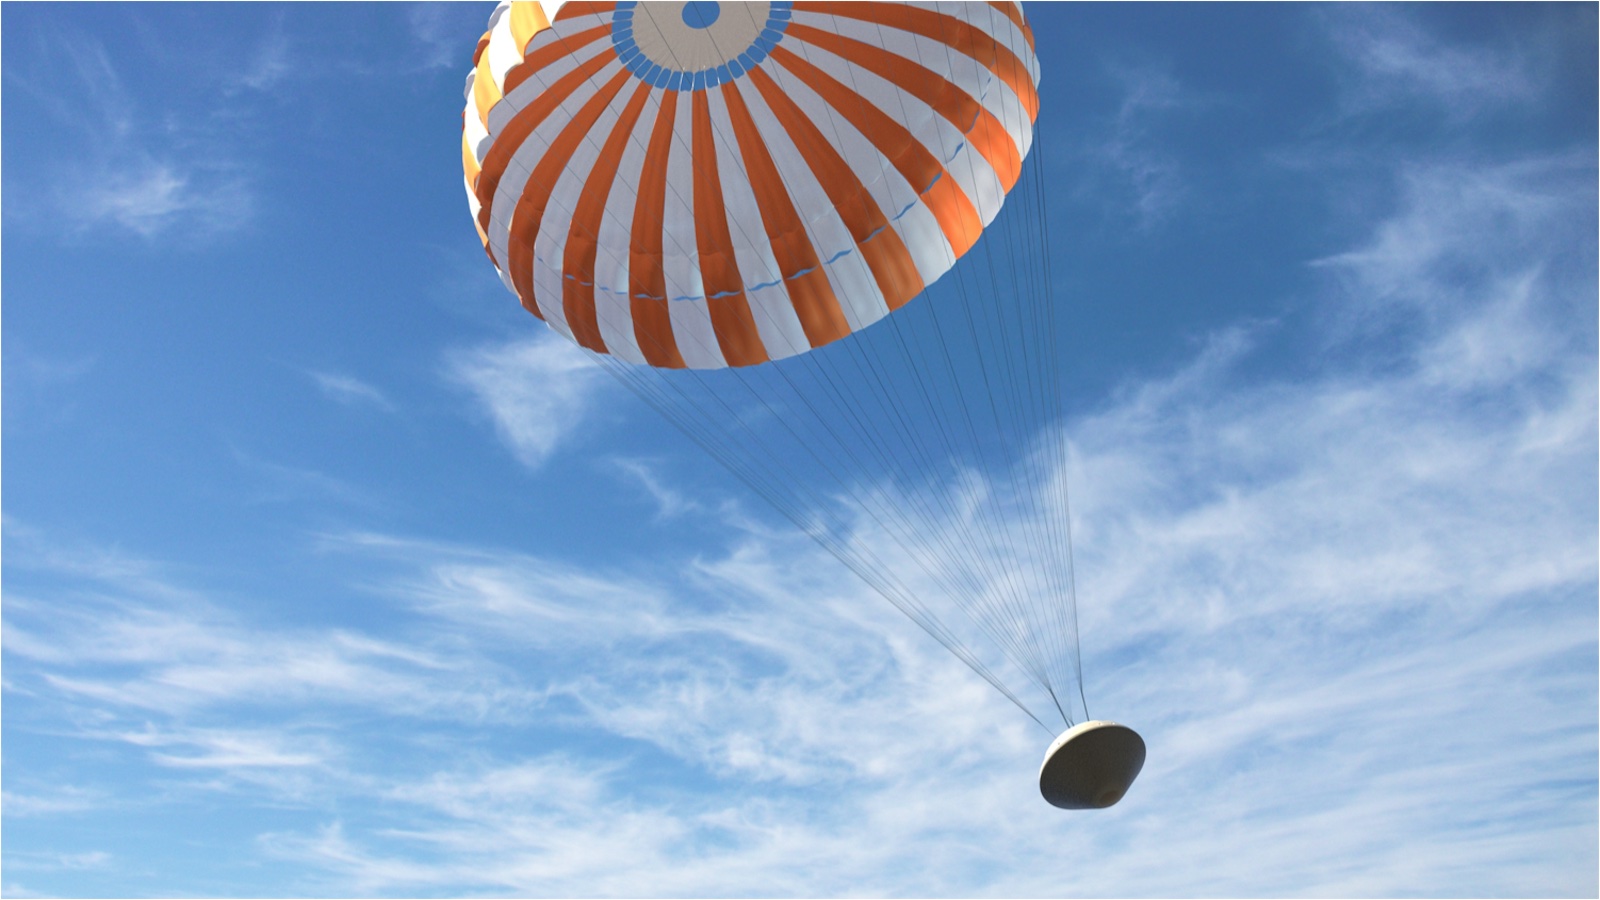 An orange and white parachute flying in the sky.